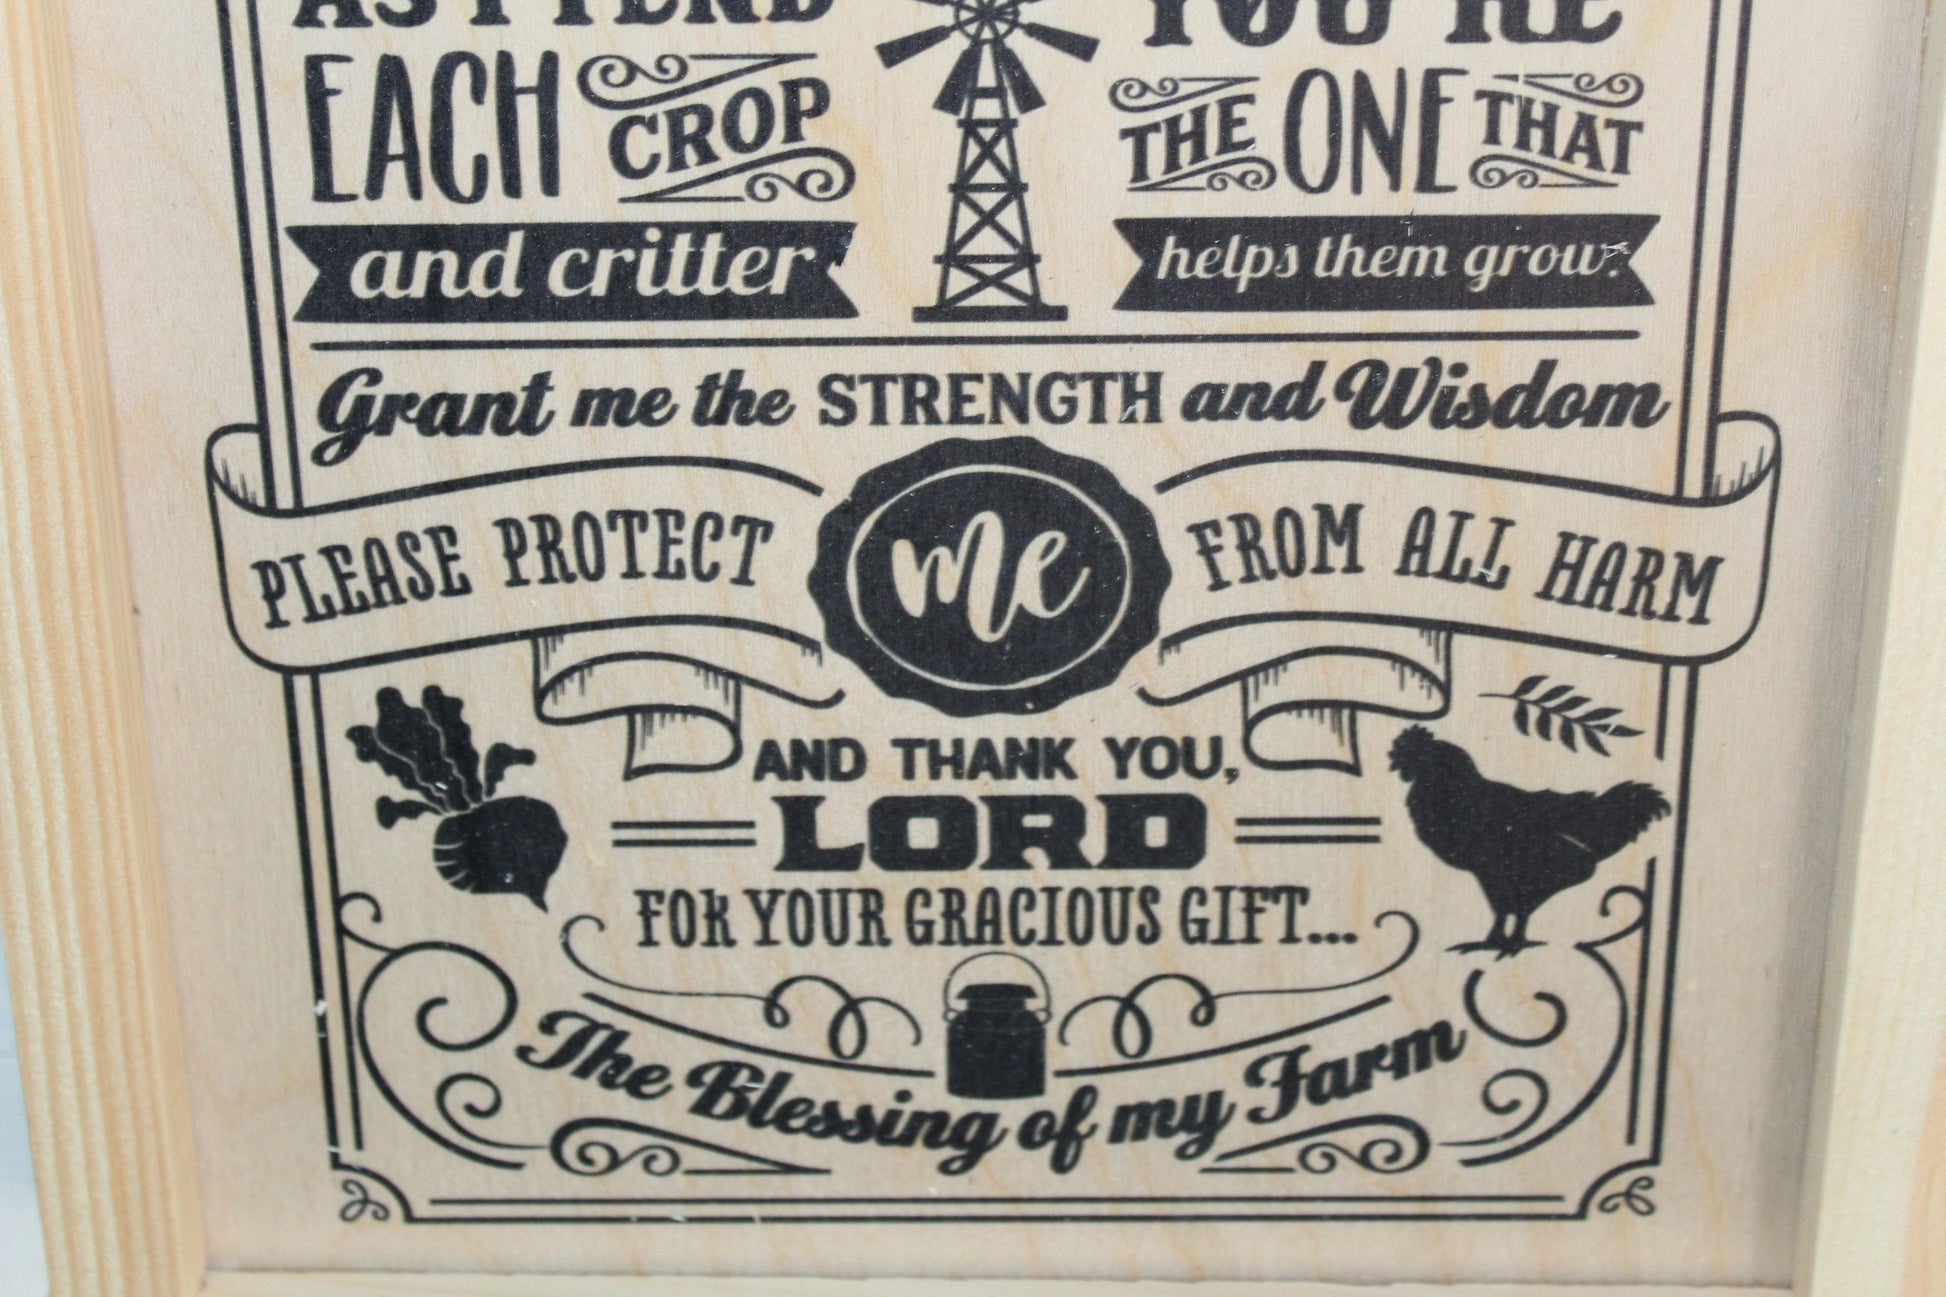 Farmer Gift The Farmers Prayer Wood Sign Farm Barn Chicken Hanging Bless this Land Crop Critter Strength Wisdom Blessings Decoration Rustic